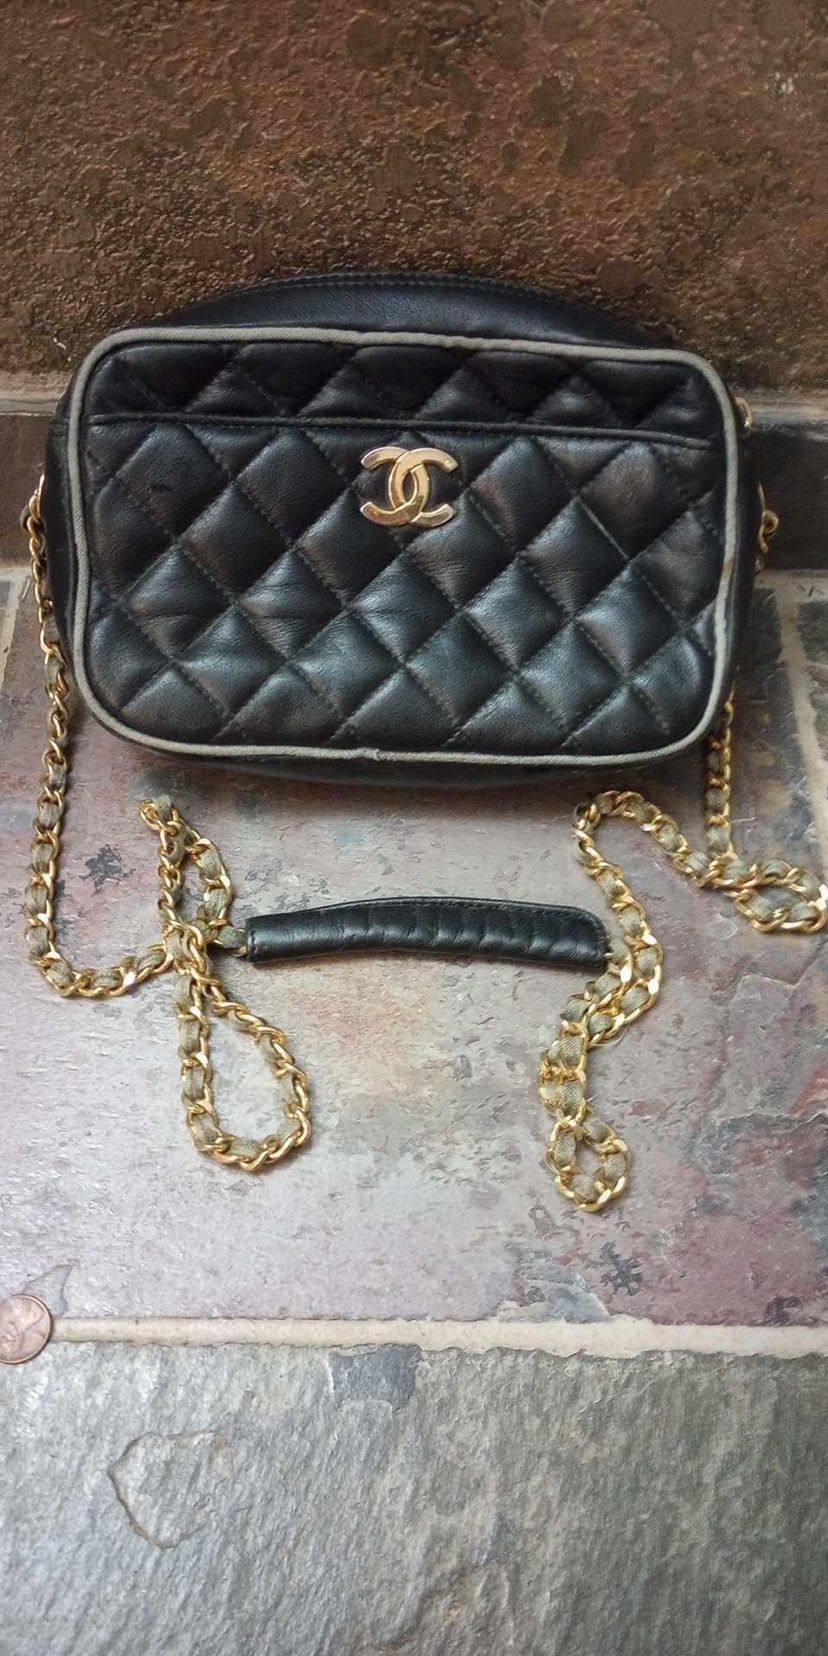 Black Chanel Leather Purse With Gold Chain 100% Authentic